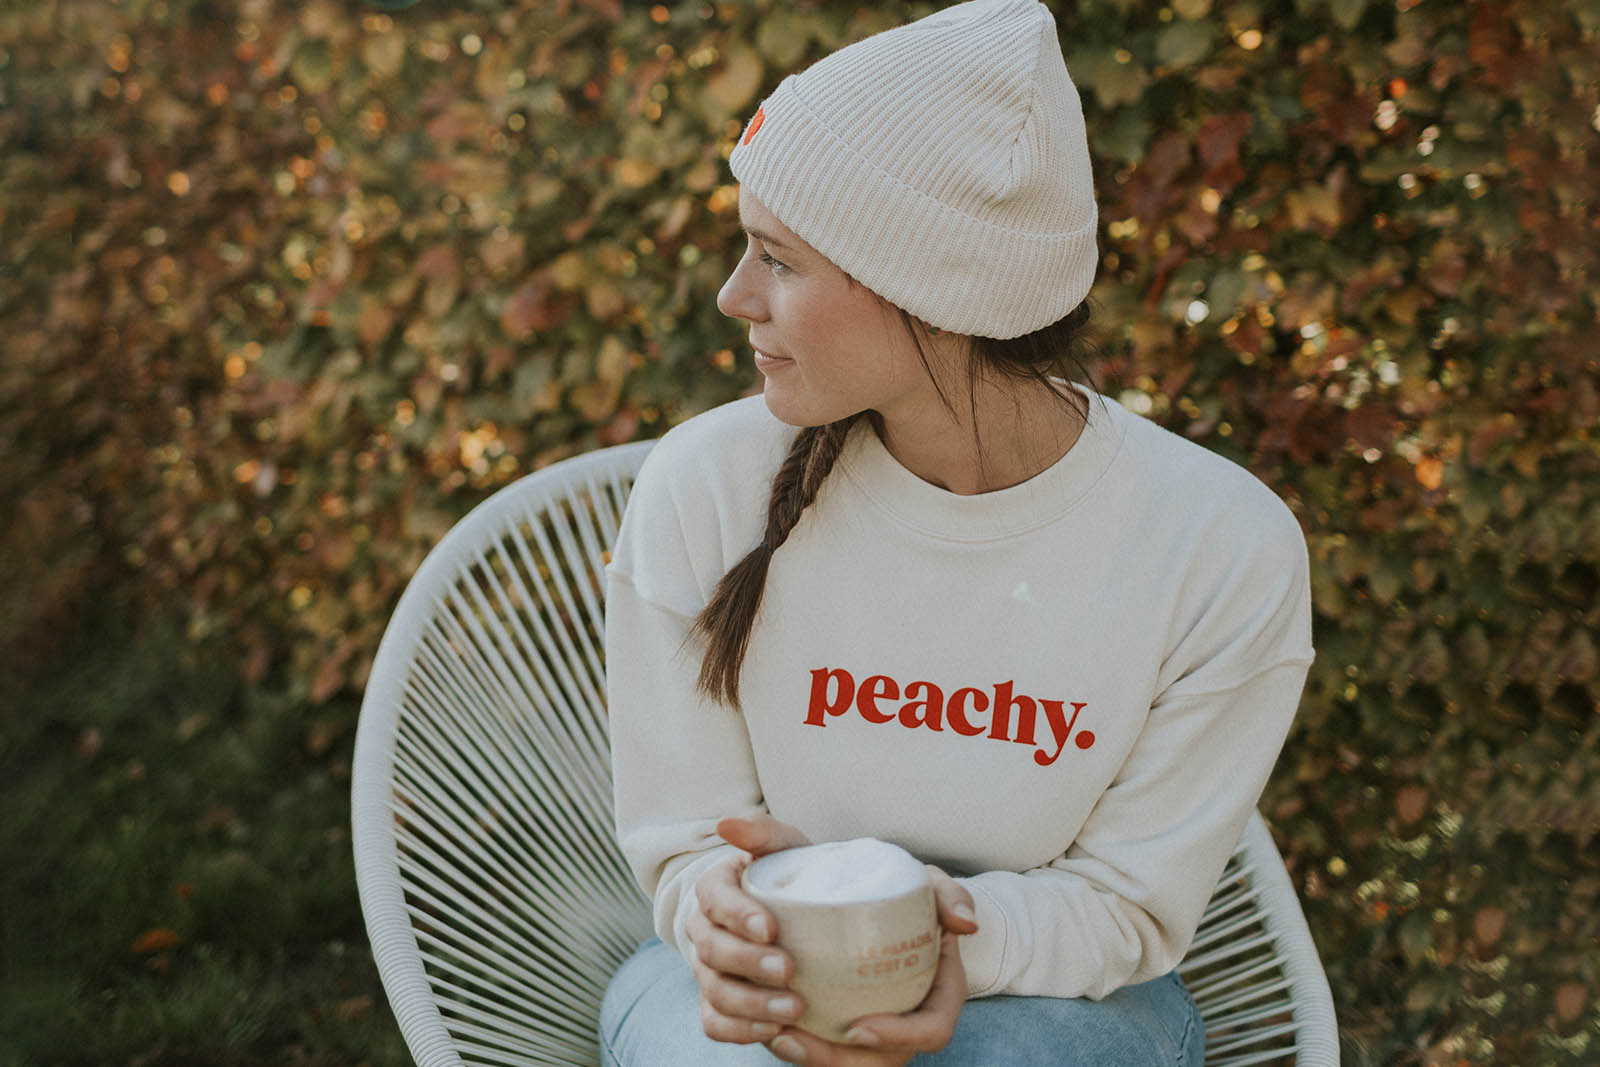 Peachy cropped sweater by Mangos on Monday